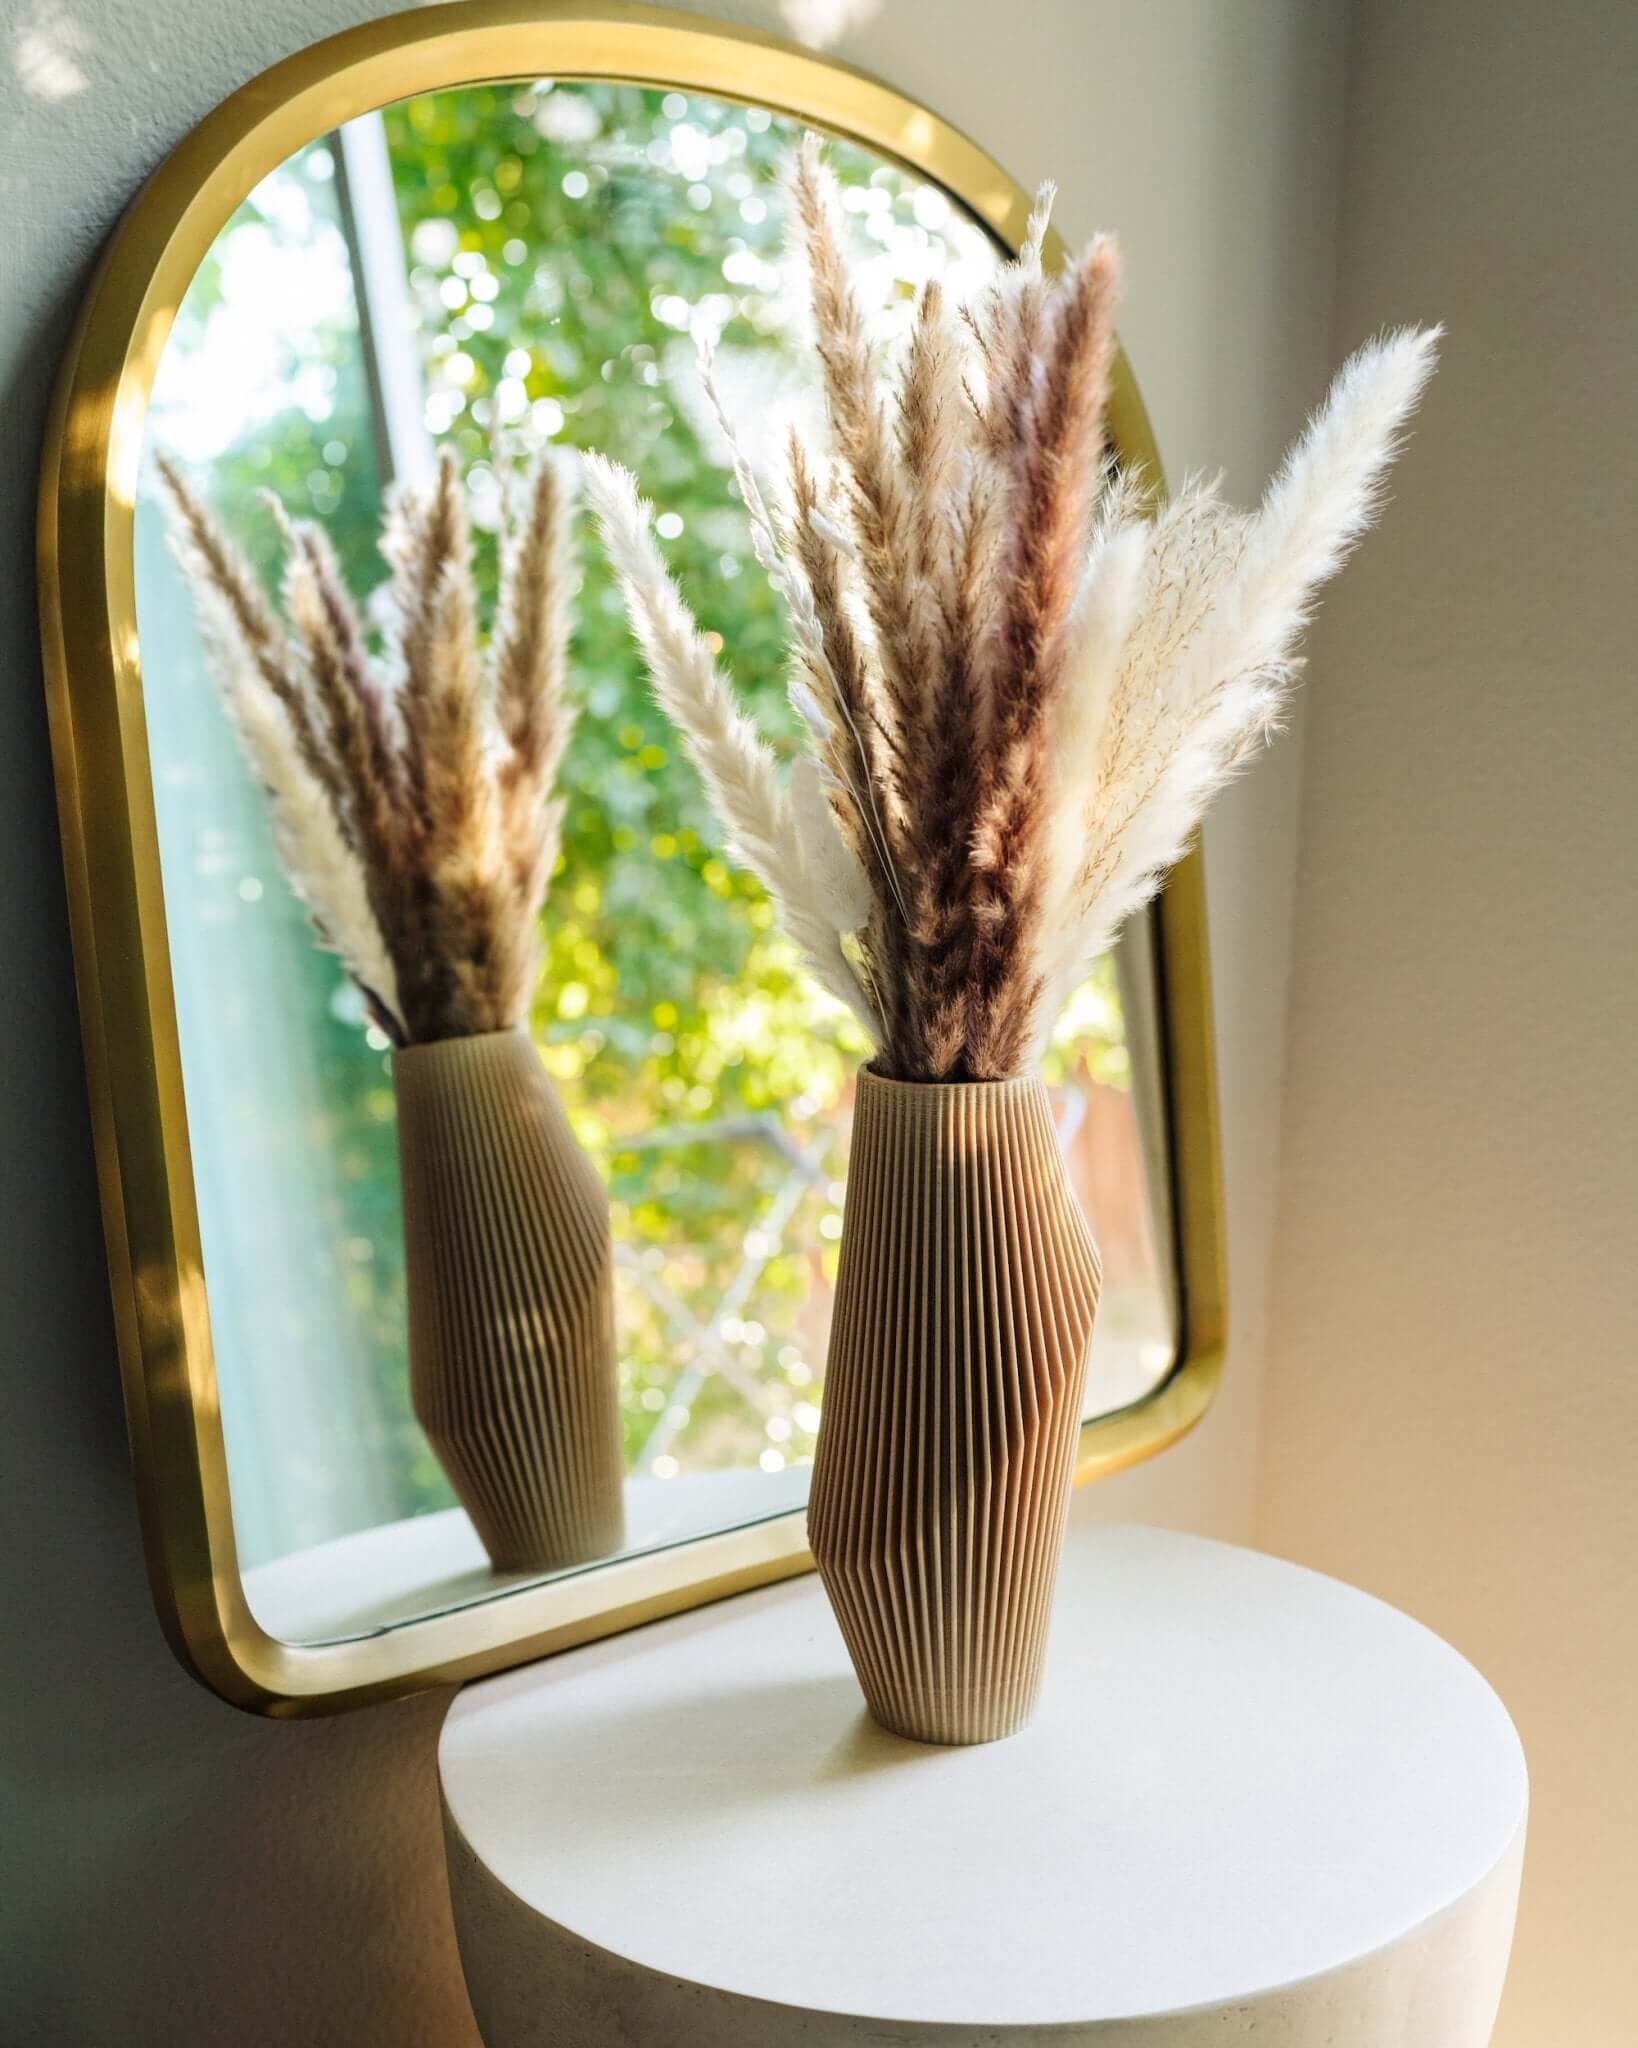 Beige vase with pampas grass decor in front of mirror